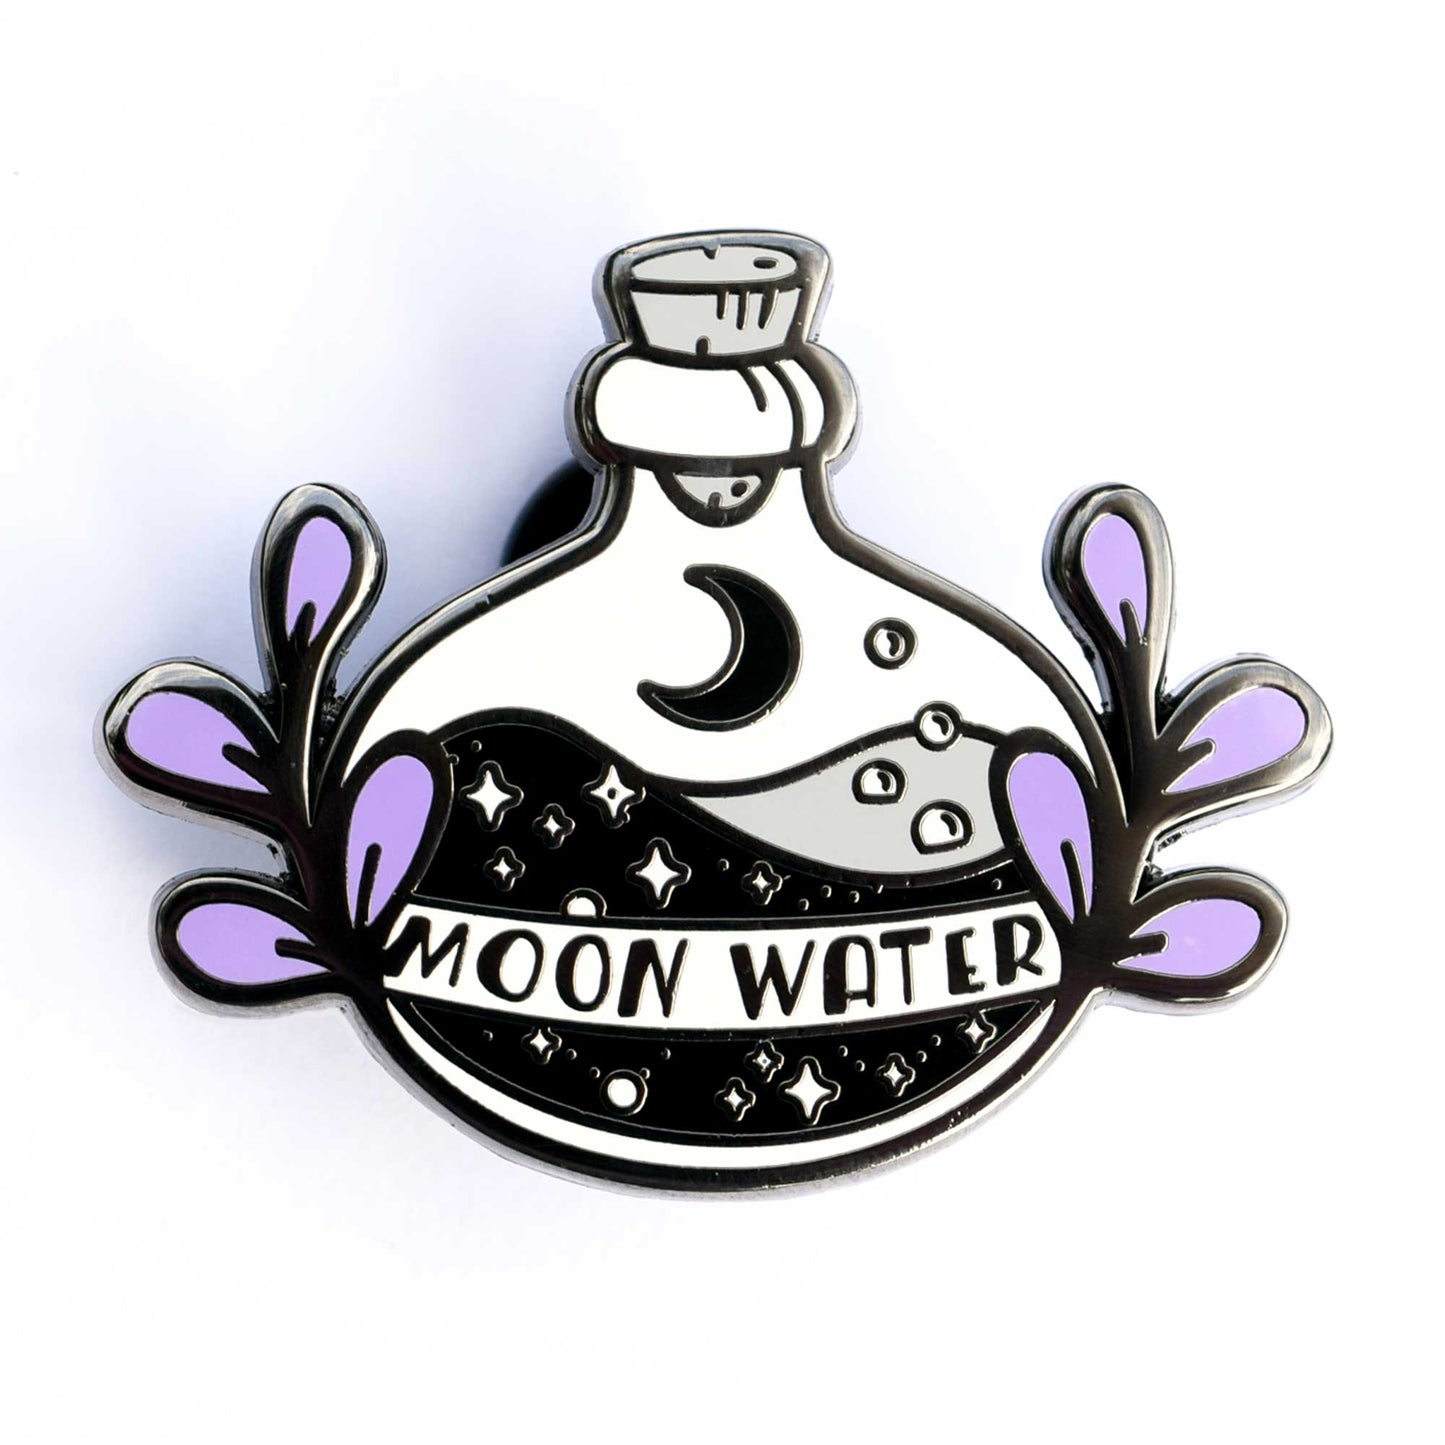 Witchy Moon Water Enamel Pin